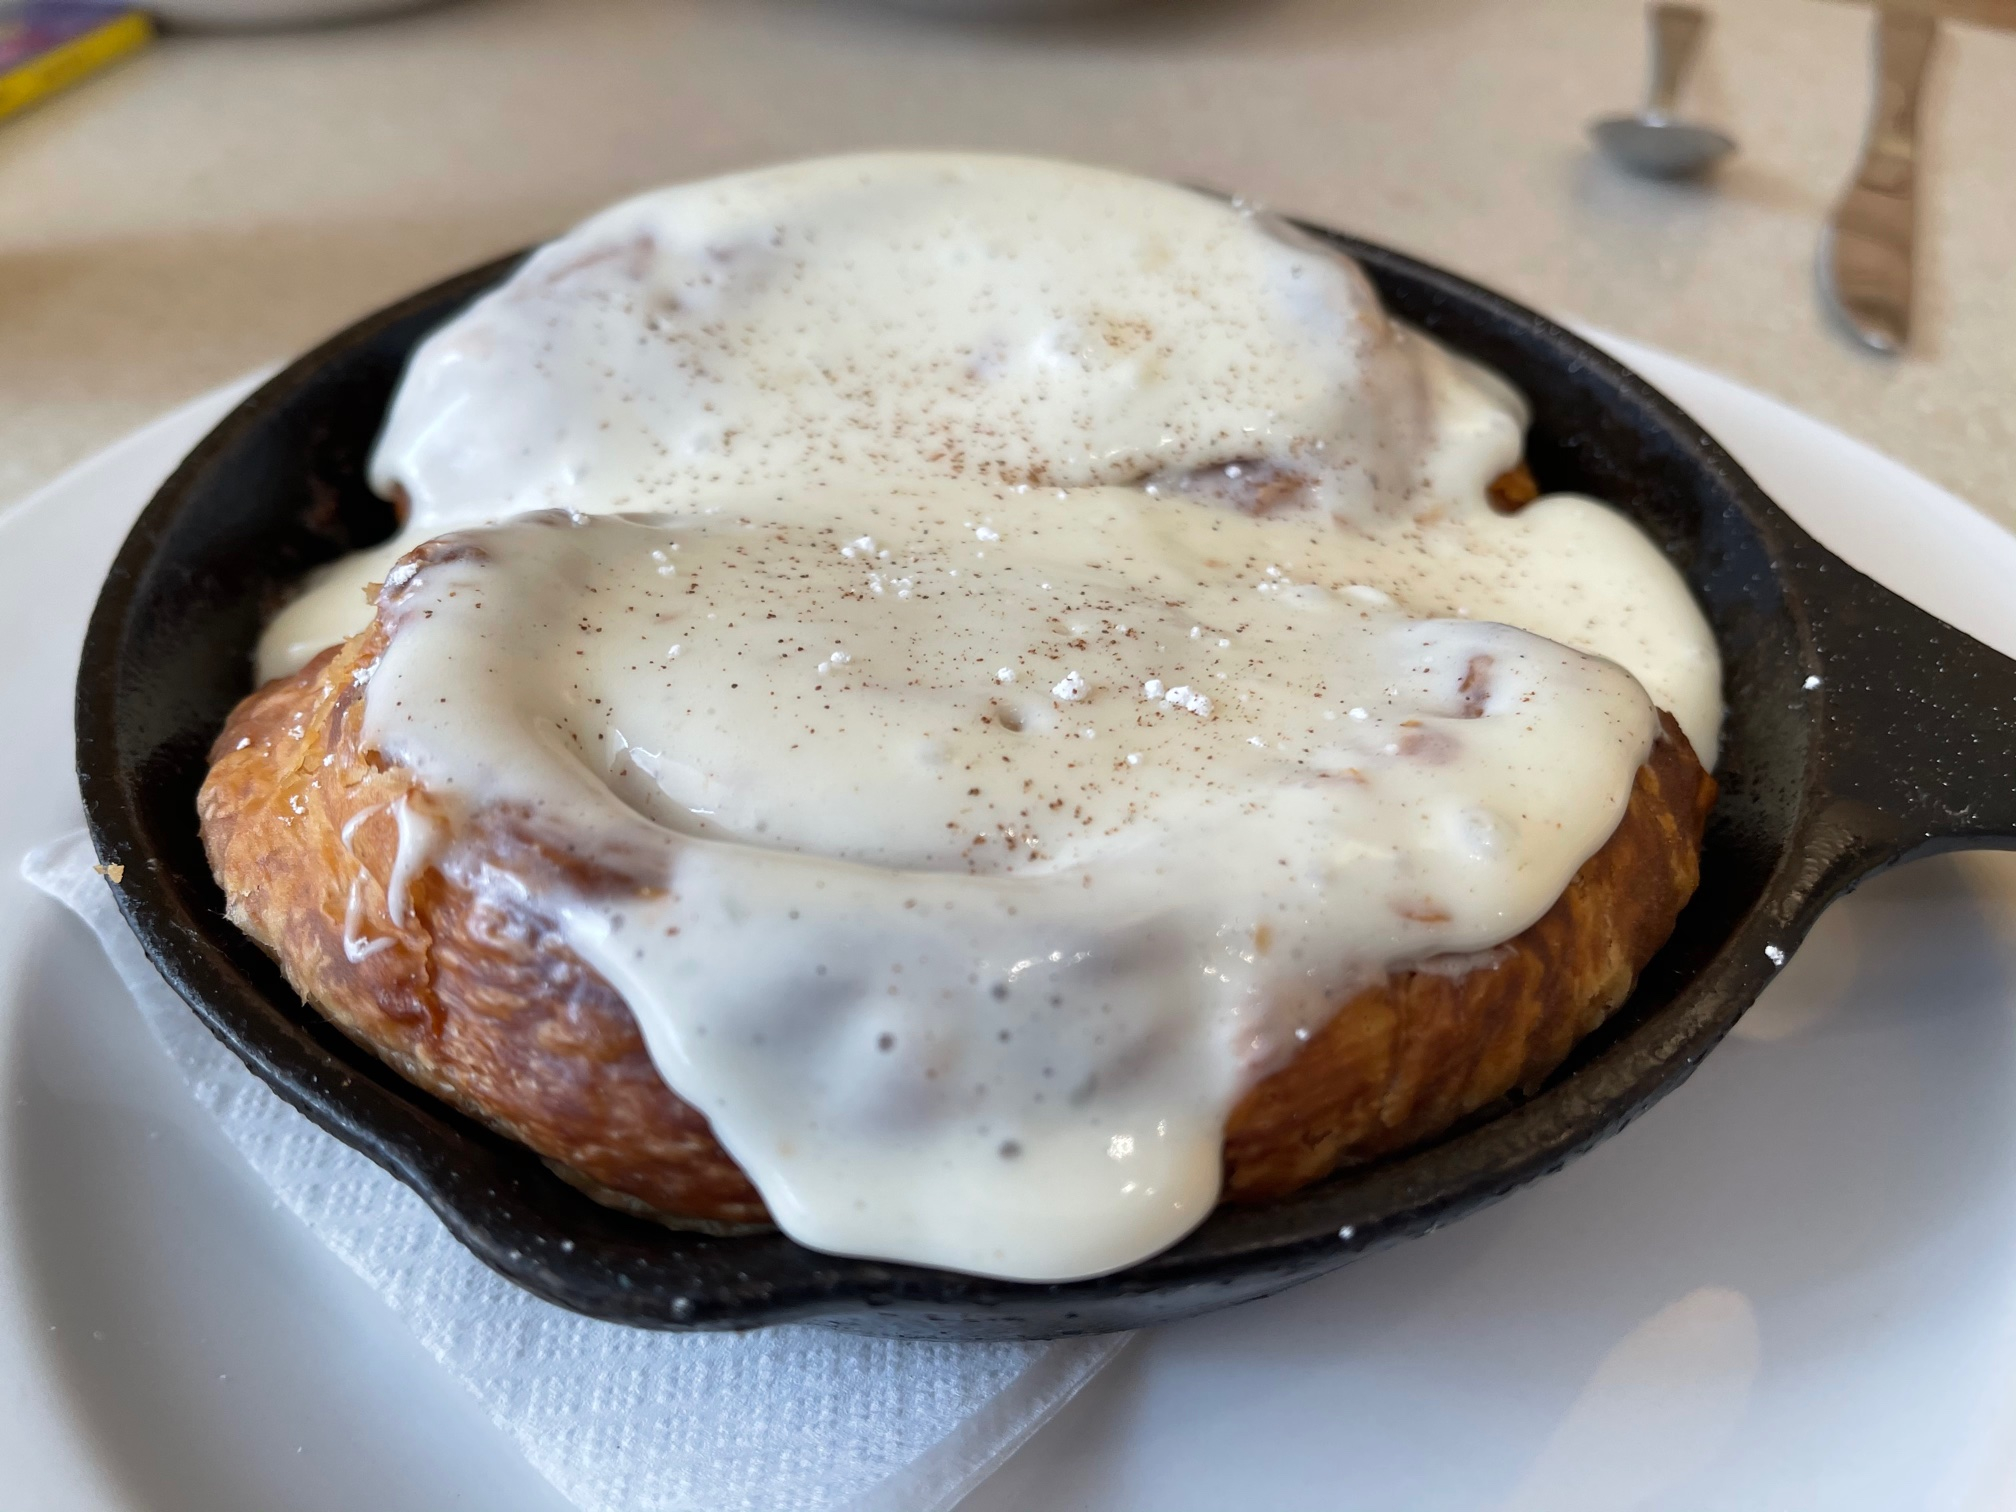 Foodie Tour of Bowling Green. Wild Eggs skillet cinnamon roll